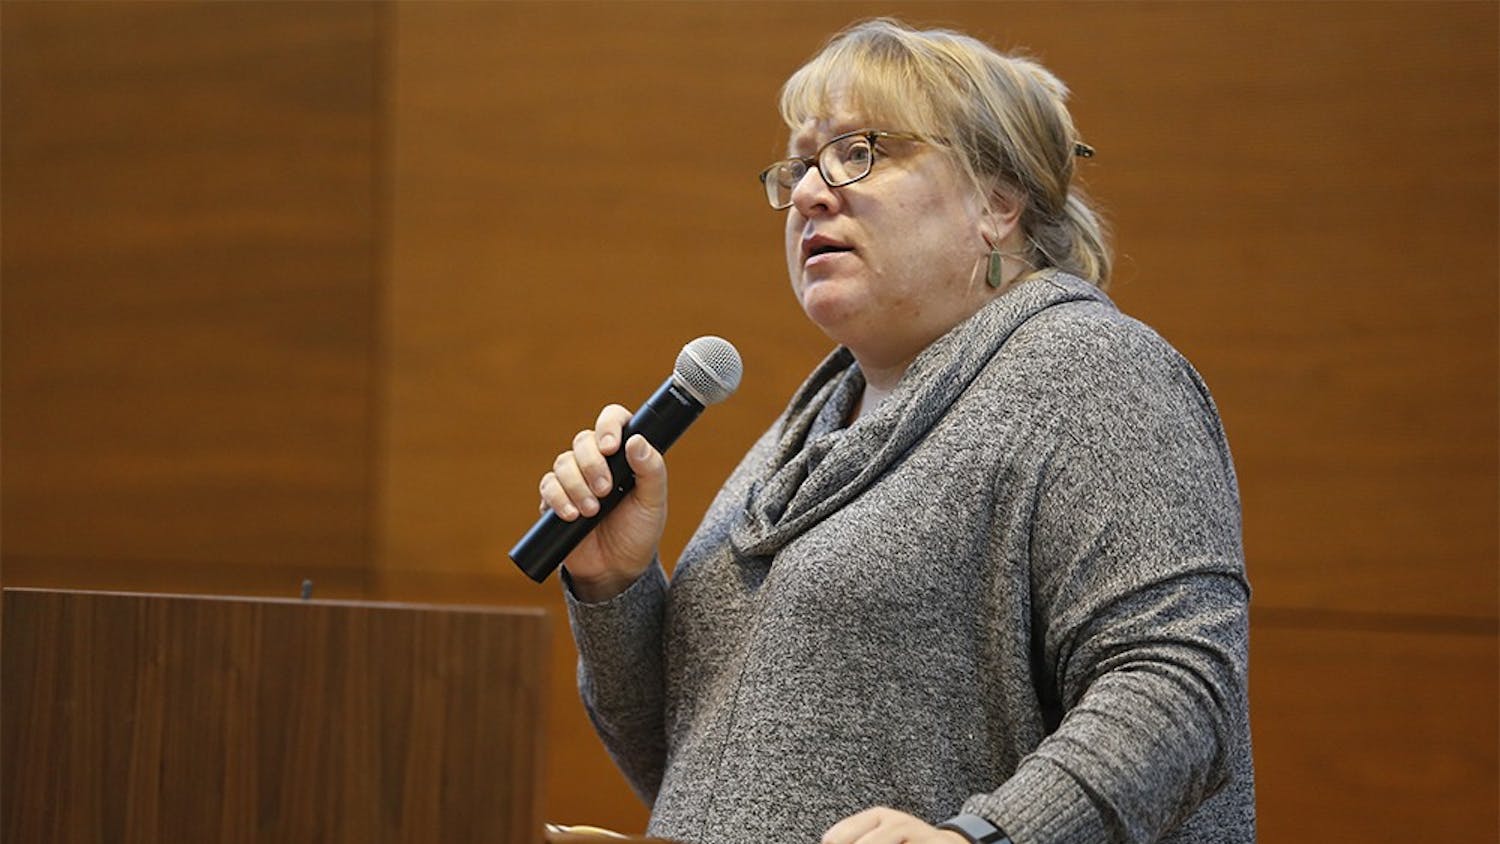 Associate Professor in the School of Global and International Studies Elizabeth Dunn speaks about the danger of "scapegoating" in terrorist situations like the one that recently took place in Paris during a teach-in Wednesday at the School of Global and International Studies.